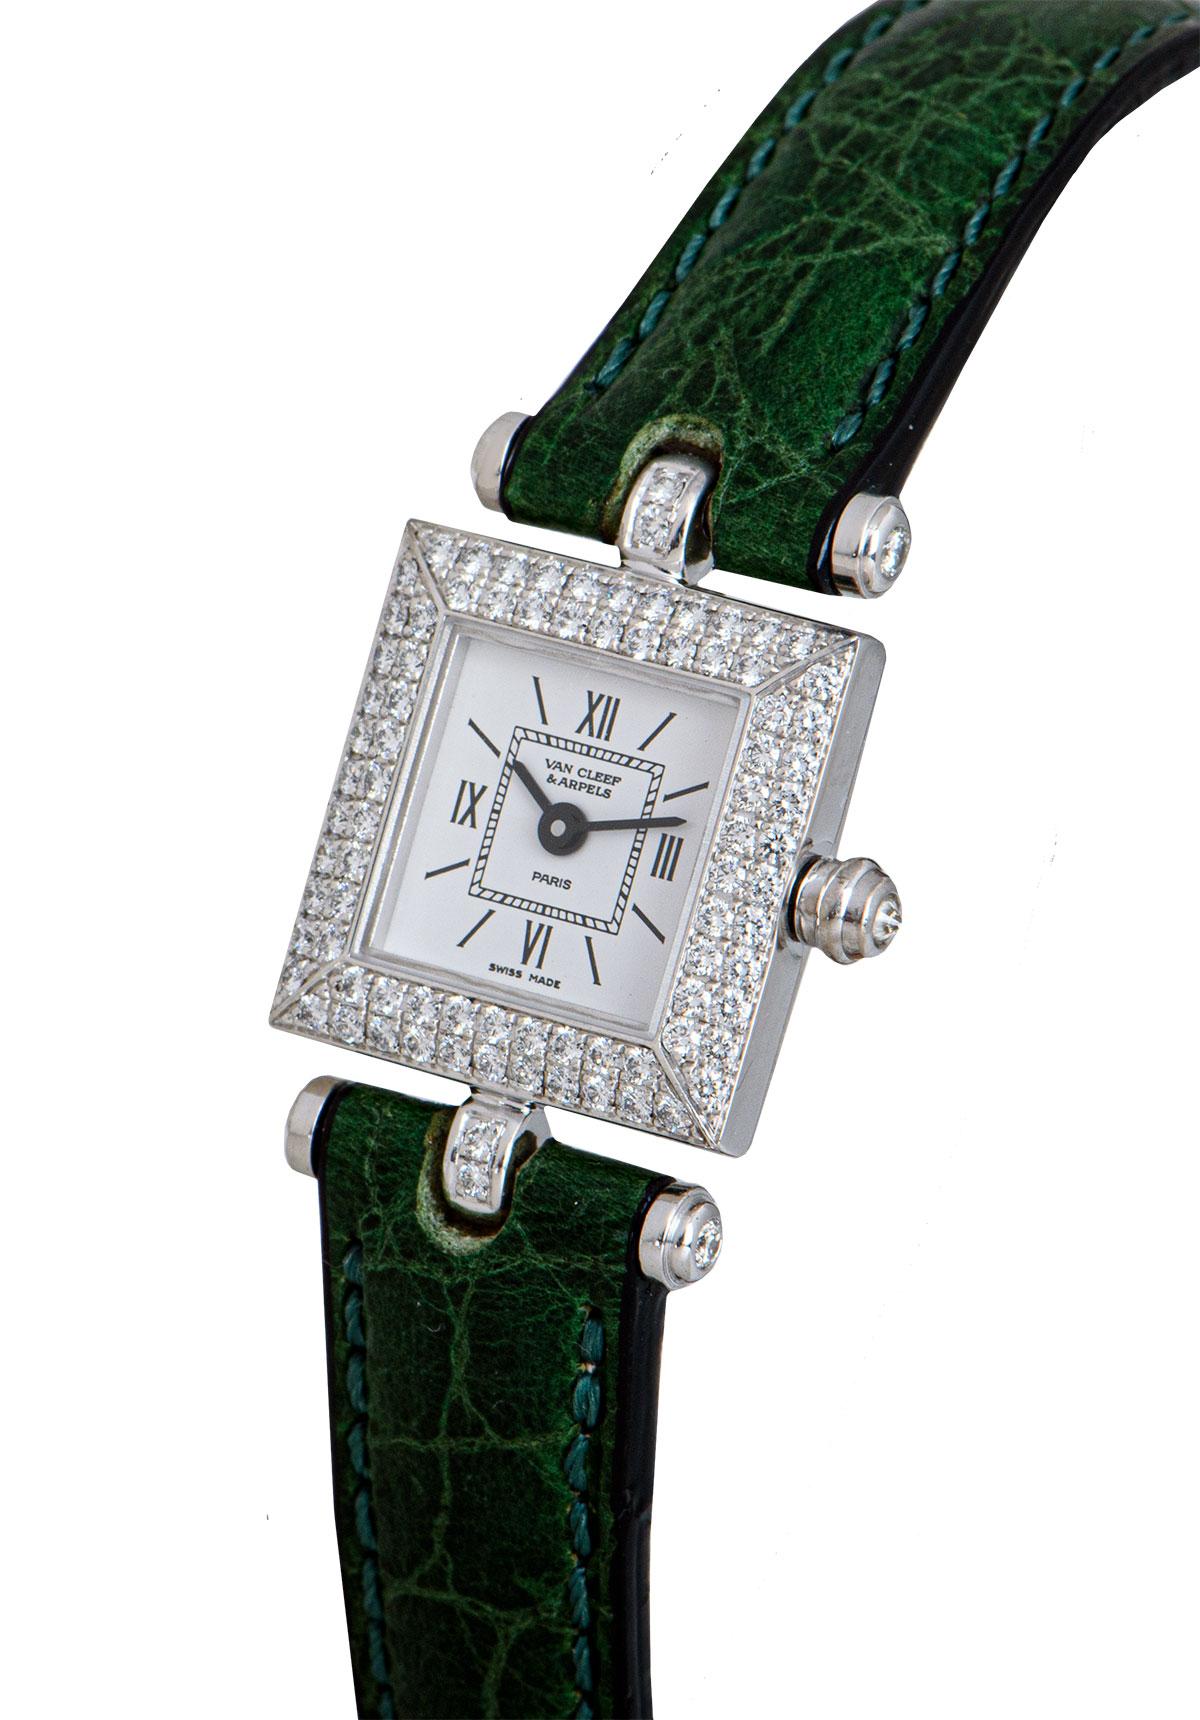 A 17 mm 18k White Gold Ladies Dress Wristwatch, silver dial with hour markers and roman numerals III, VI, IX and XII, a fixed 18k white gold bezel set with approximately 80 round brilliant cut diamonds, an 18k white gold crown set with a single